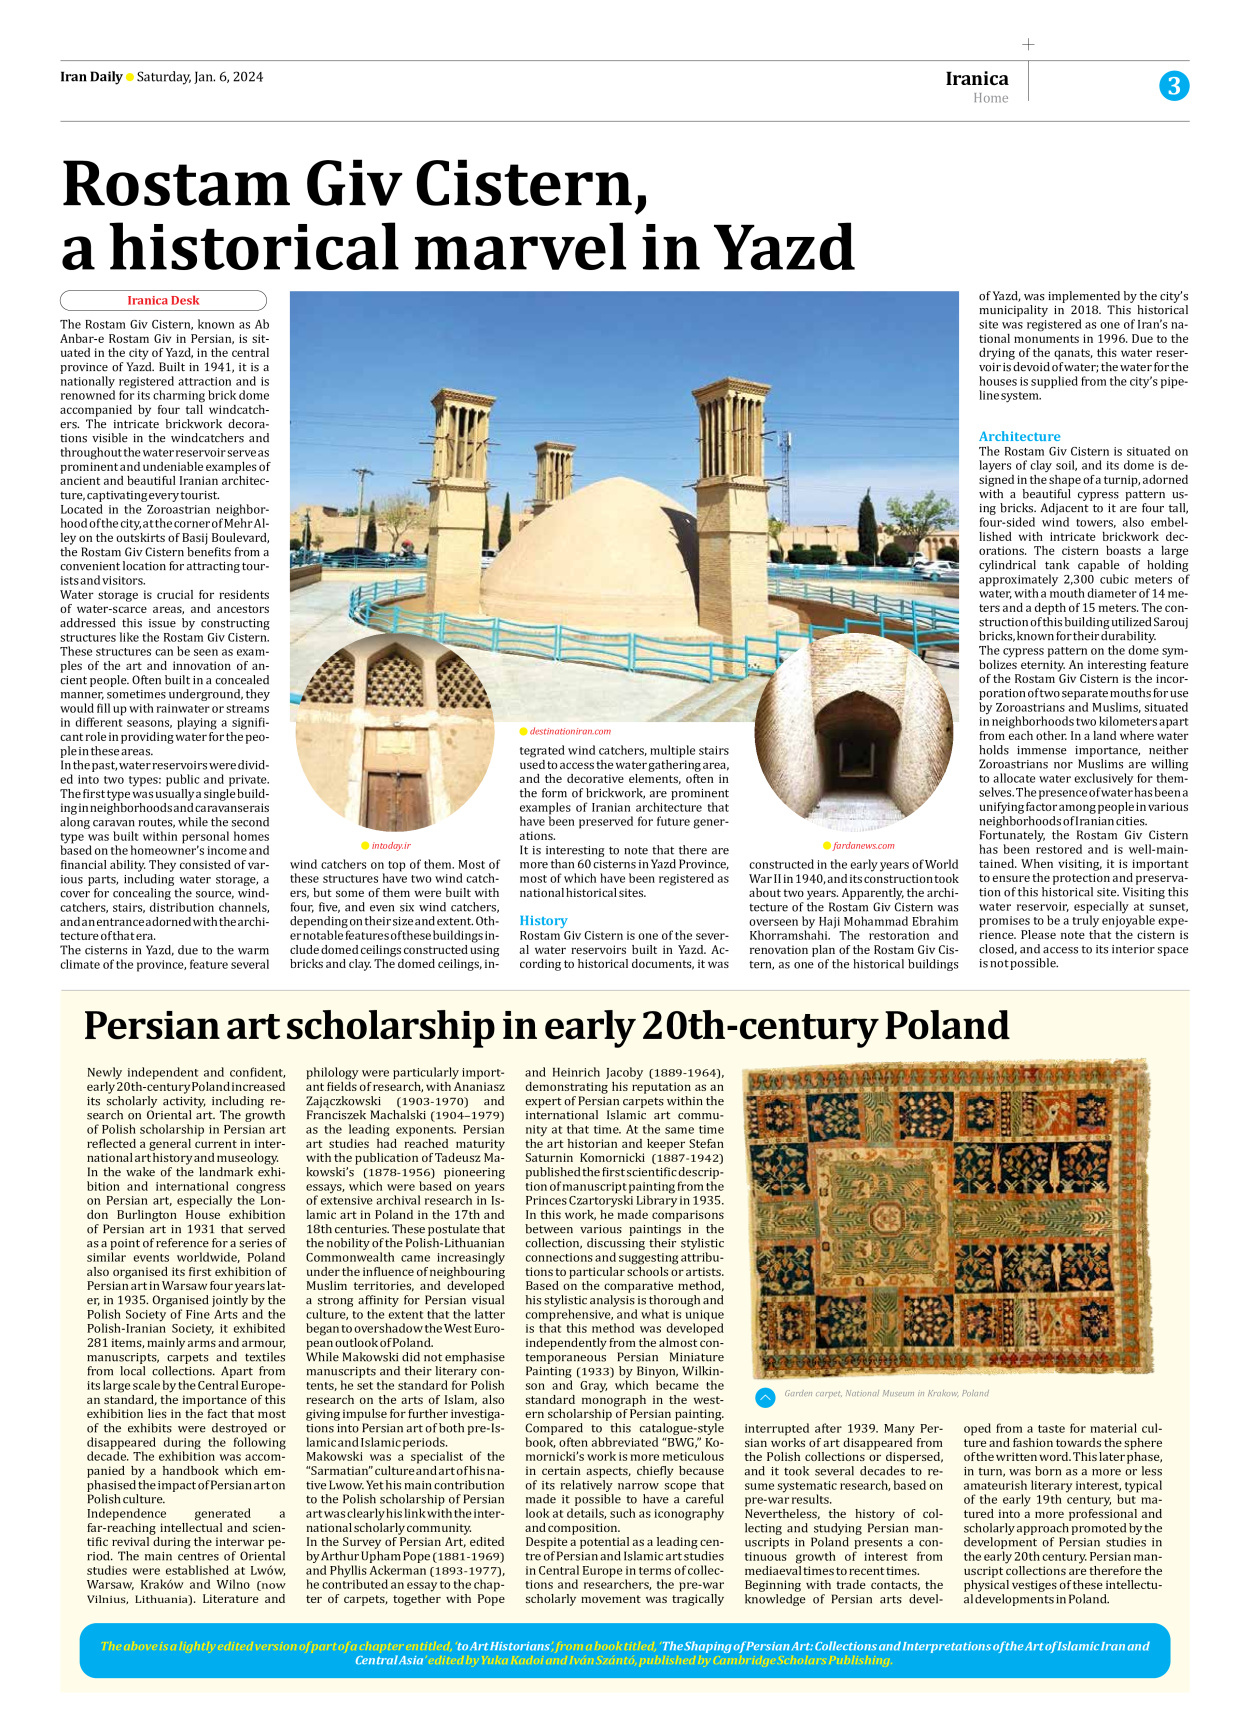 Iran Daily - Number Seven Thousand Four Hundred and Seventy Seven - 06 January 2024 - Page 3